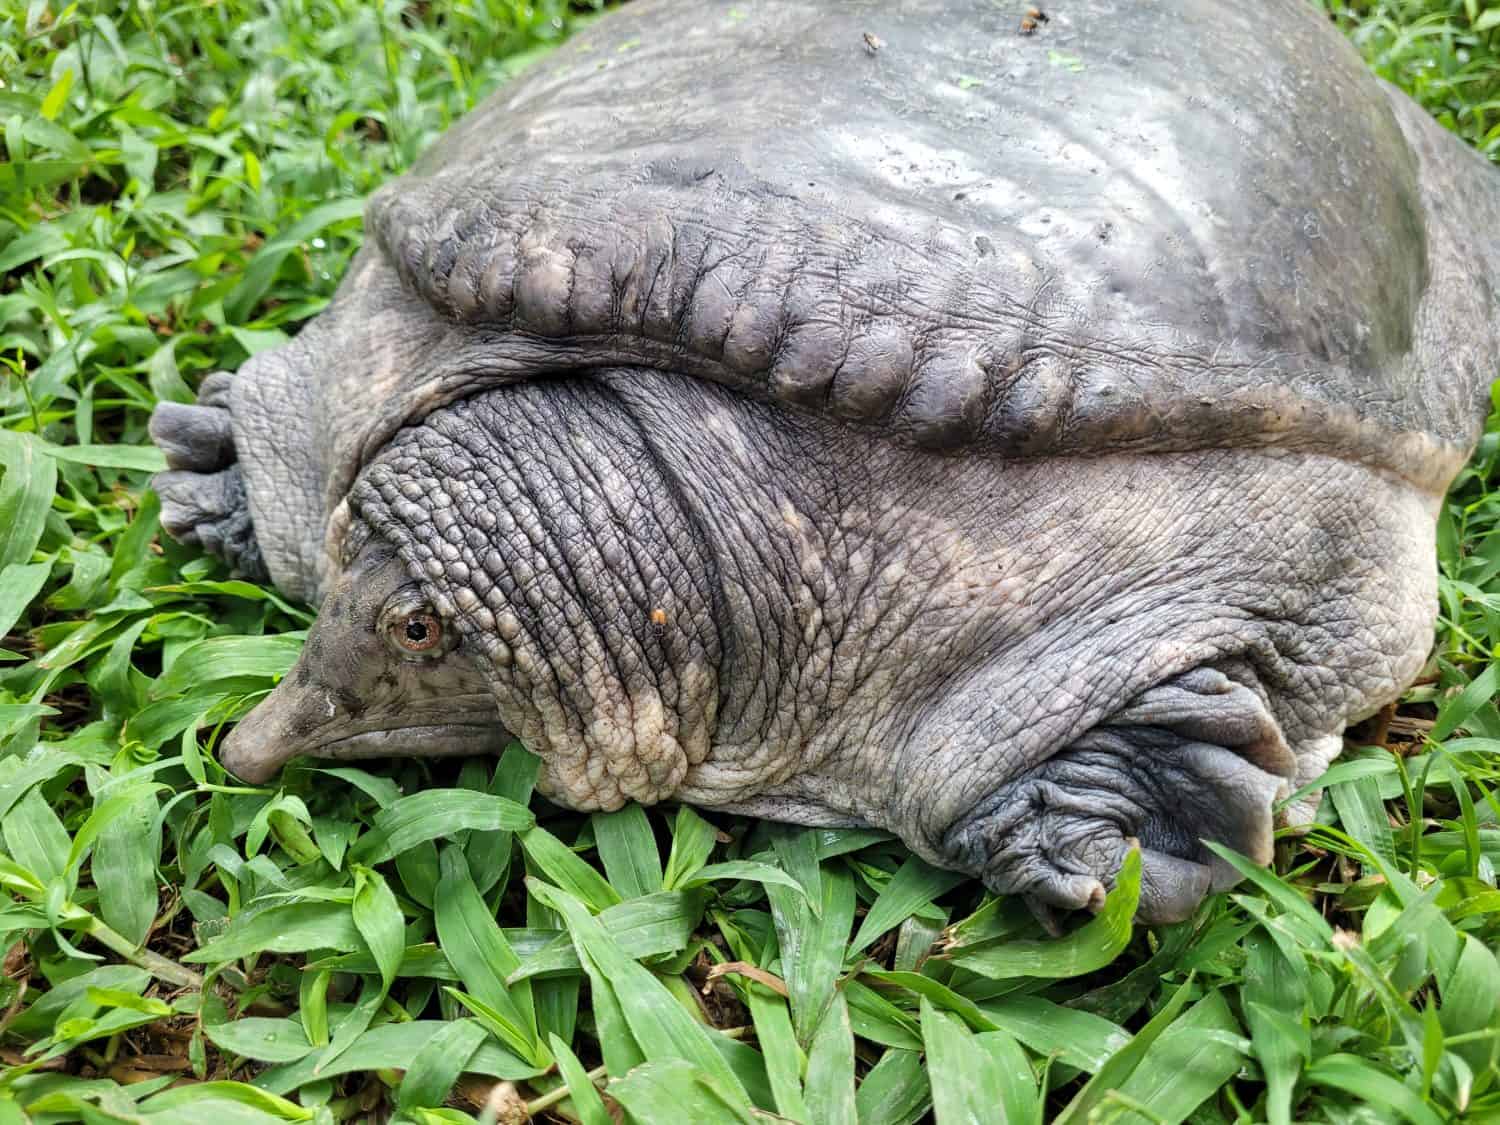 Southeast asian soft-shelled turtle in the green grass background. The head, neck and nose are long.